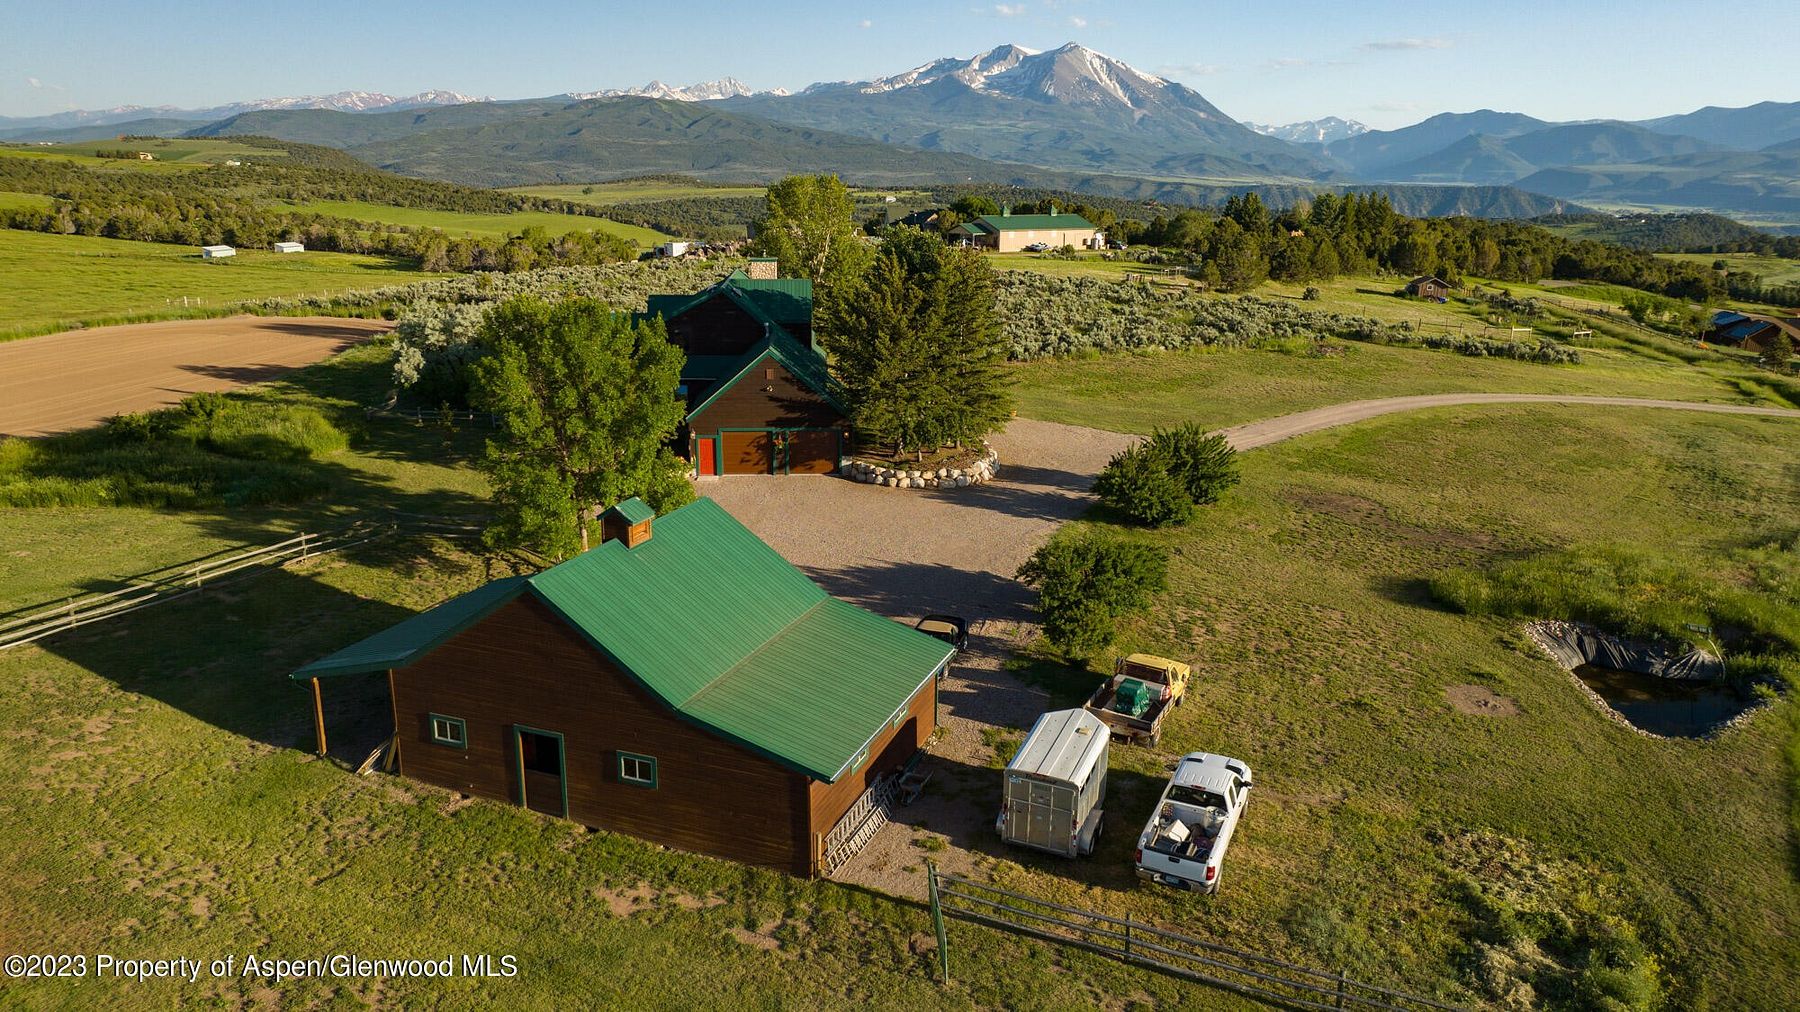 6.3 Acres of Land with Home for Sale in Carbondale, Colorado